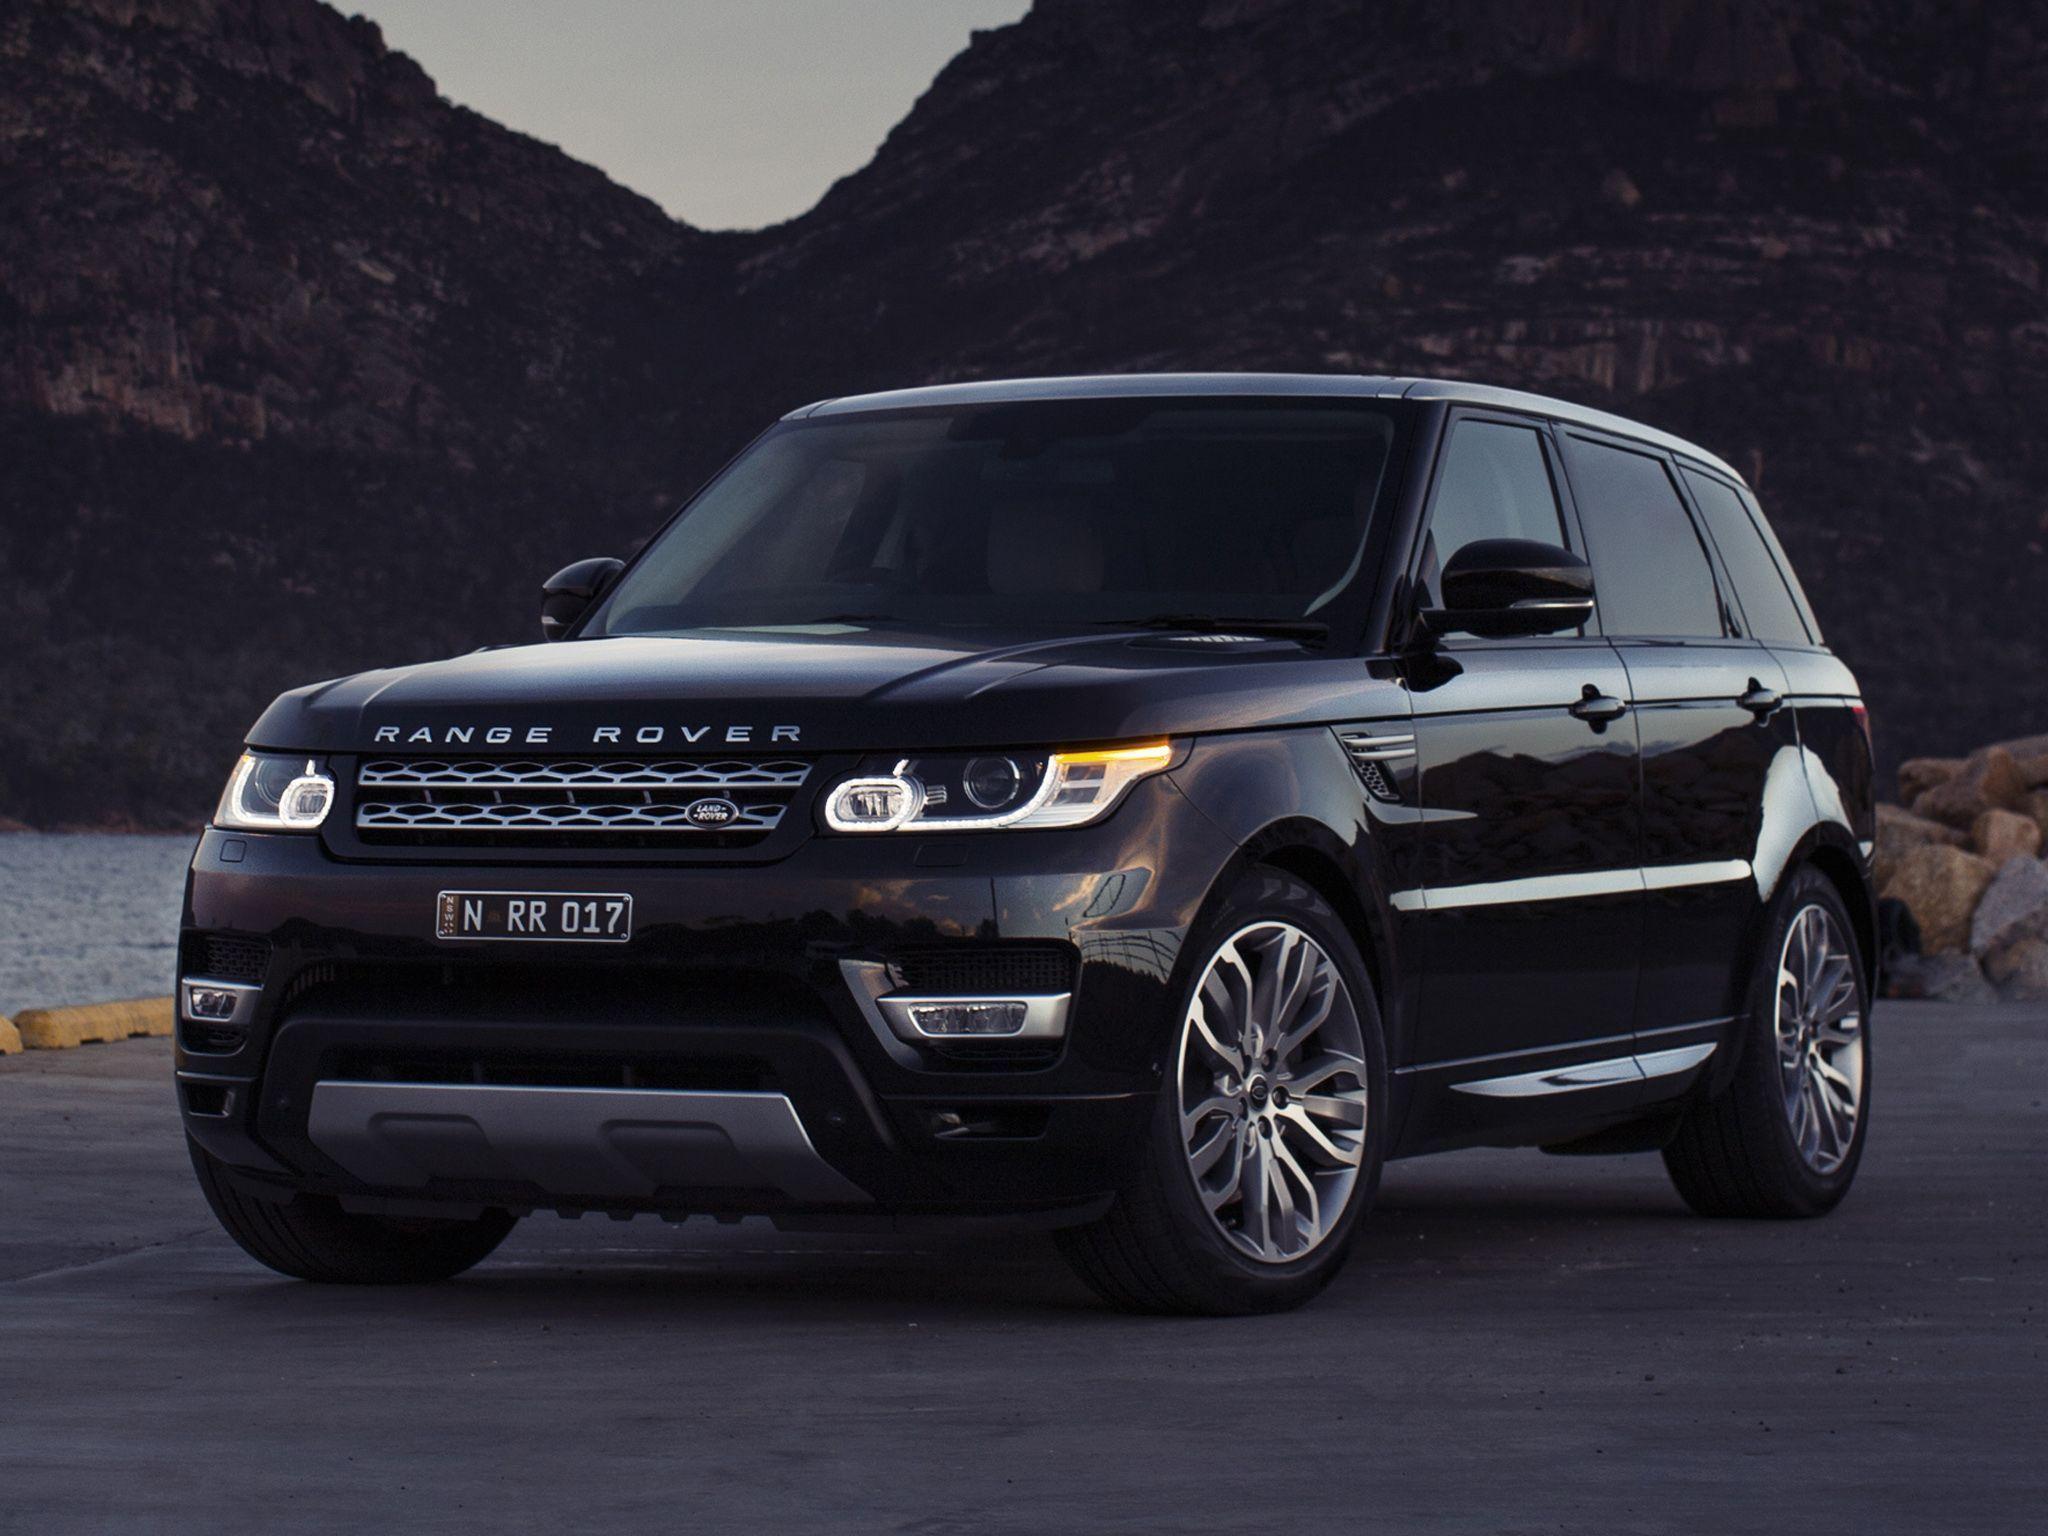 about Range Rover 2014. Range Rovers